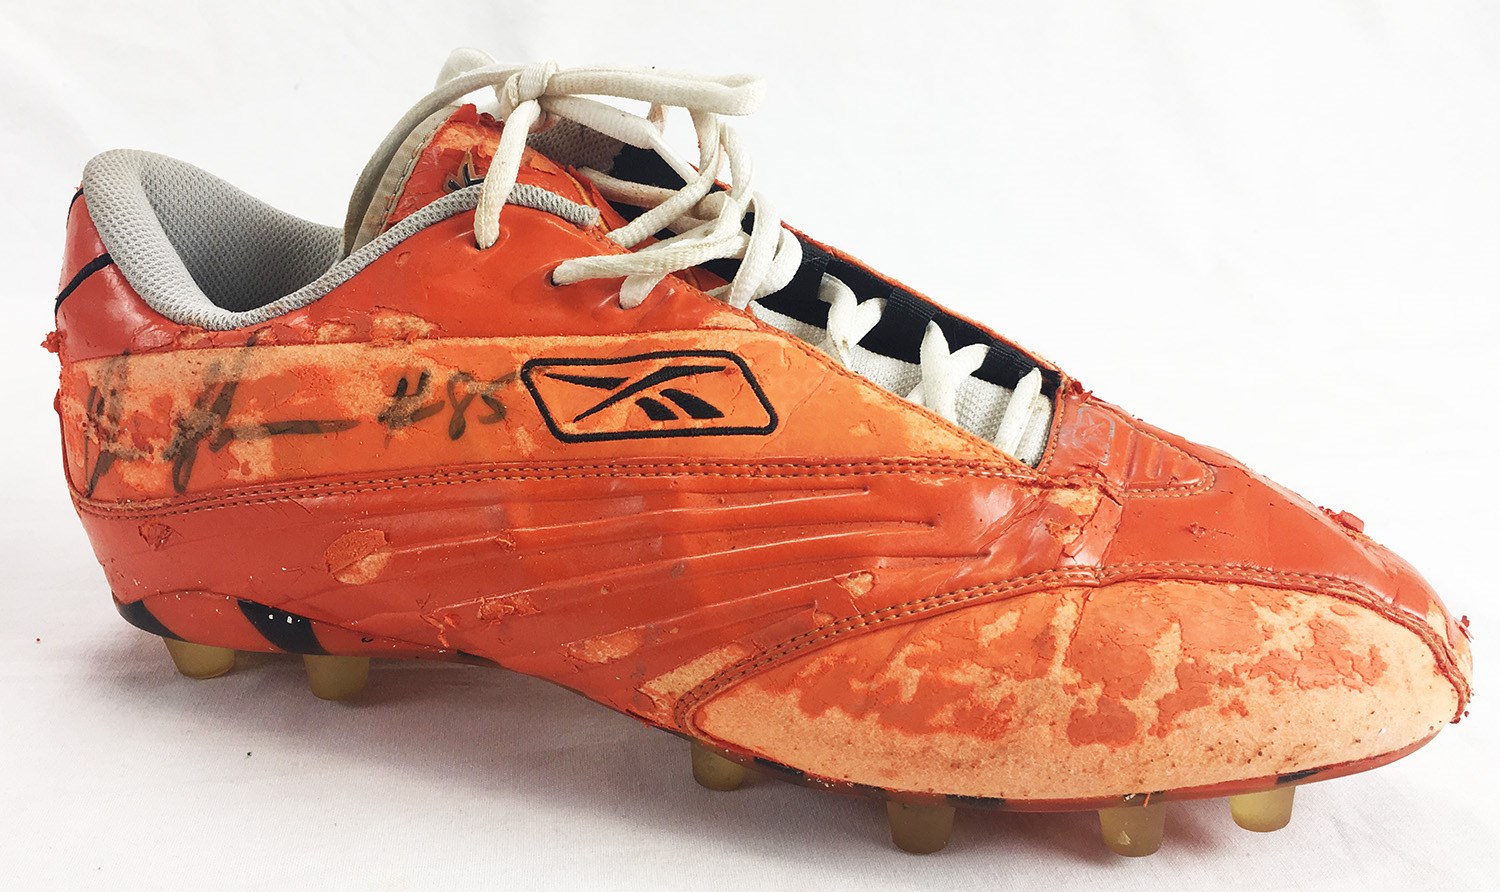 Football - Chad Johnson Signed Game Worn Cleat